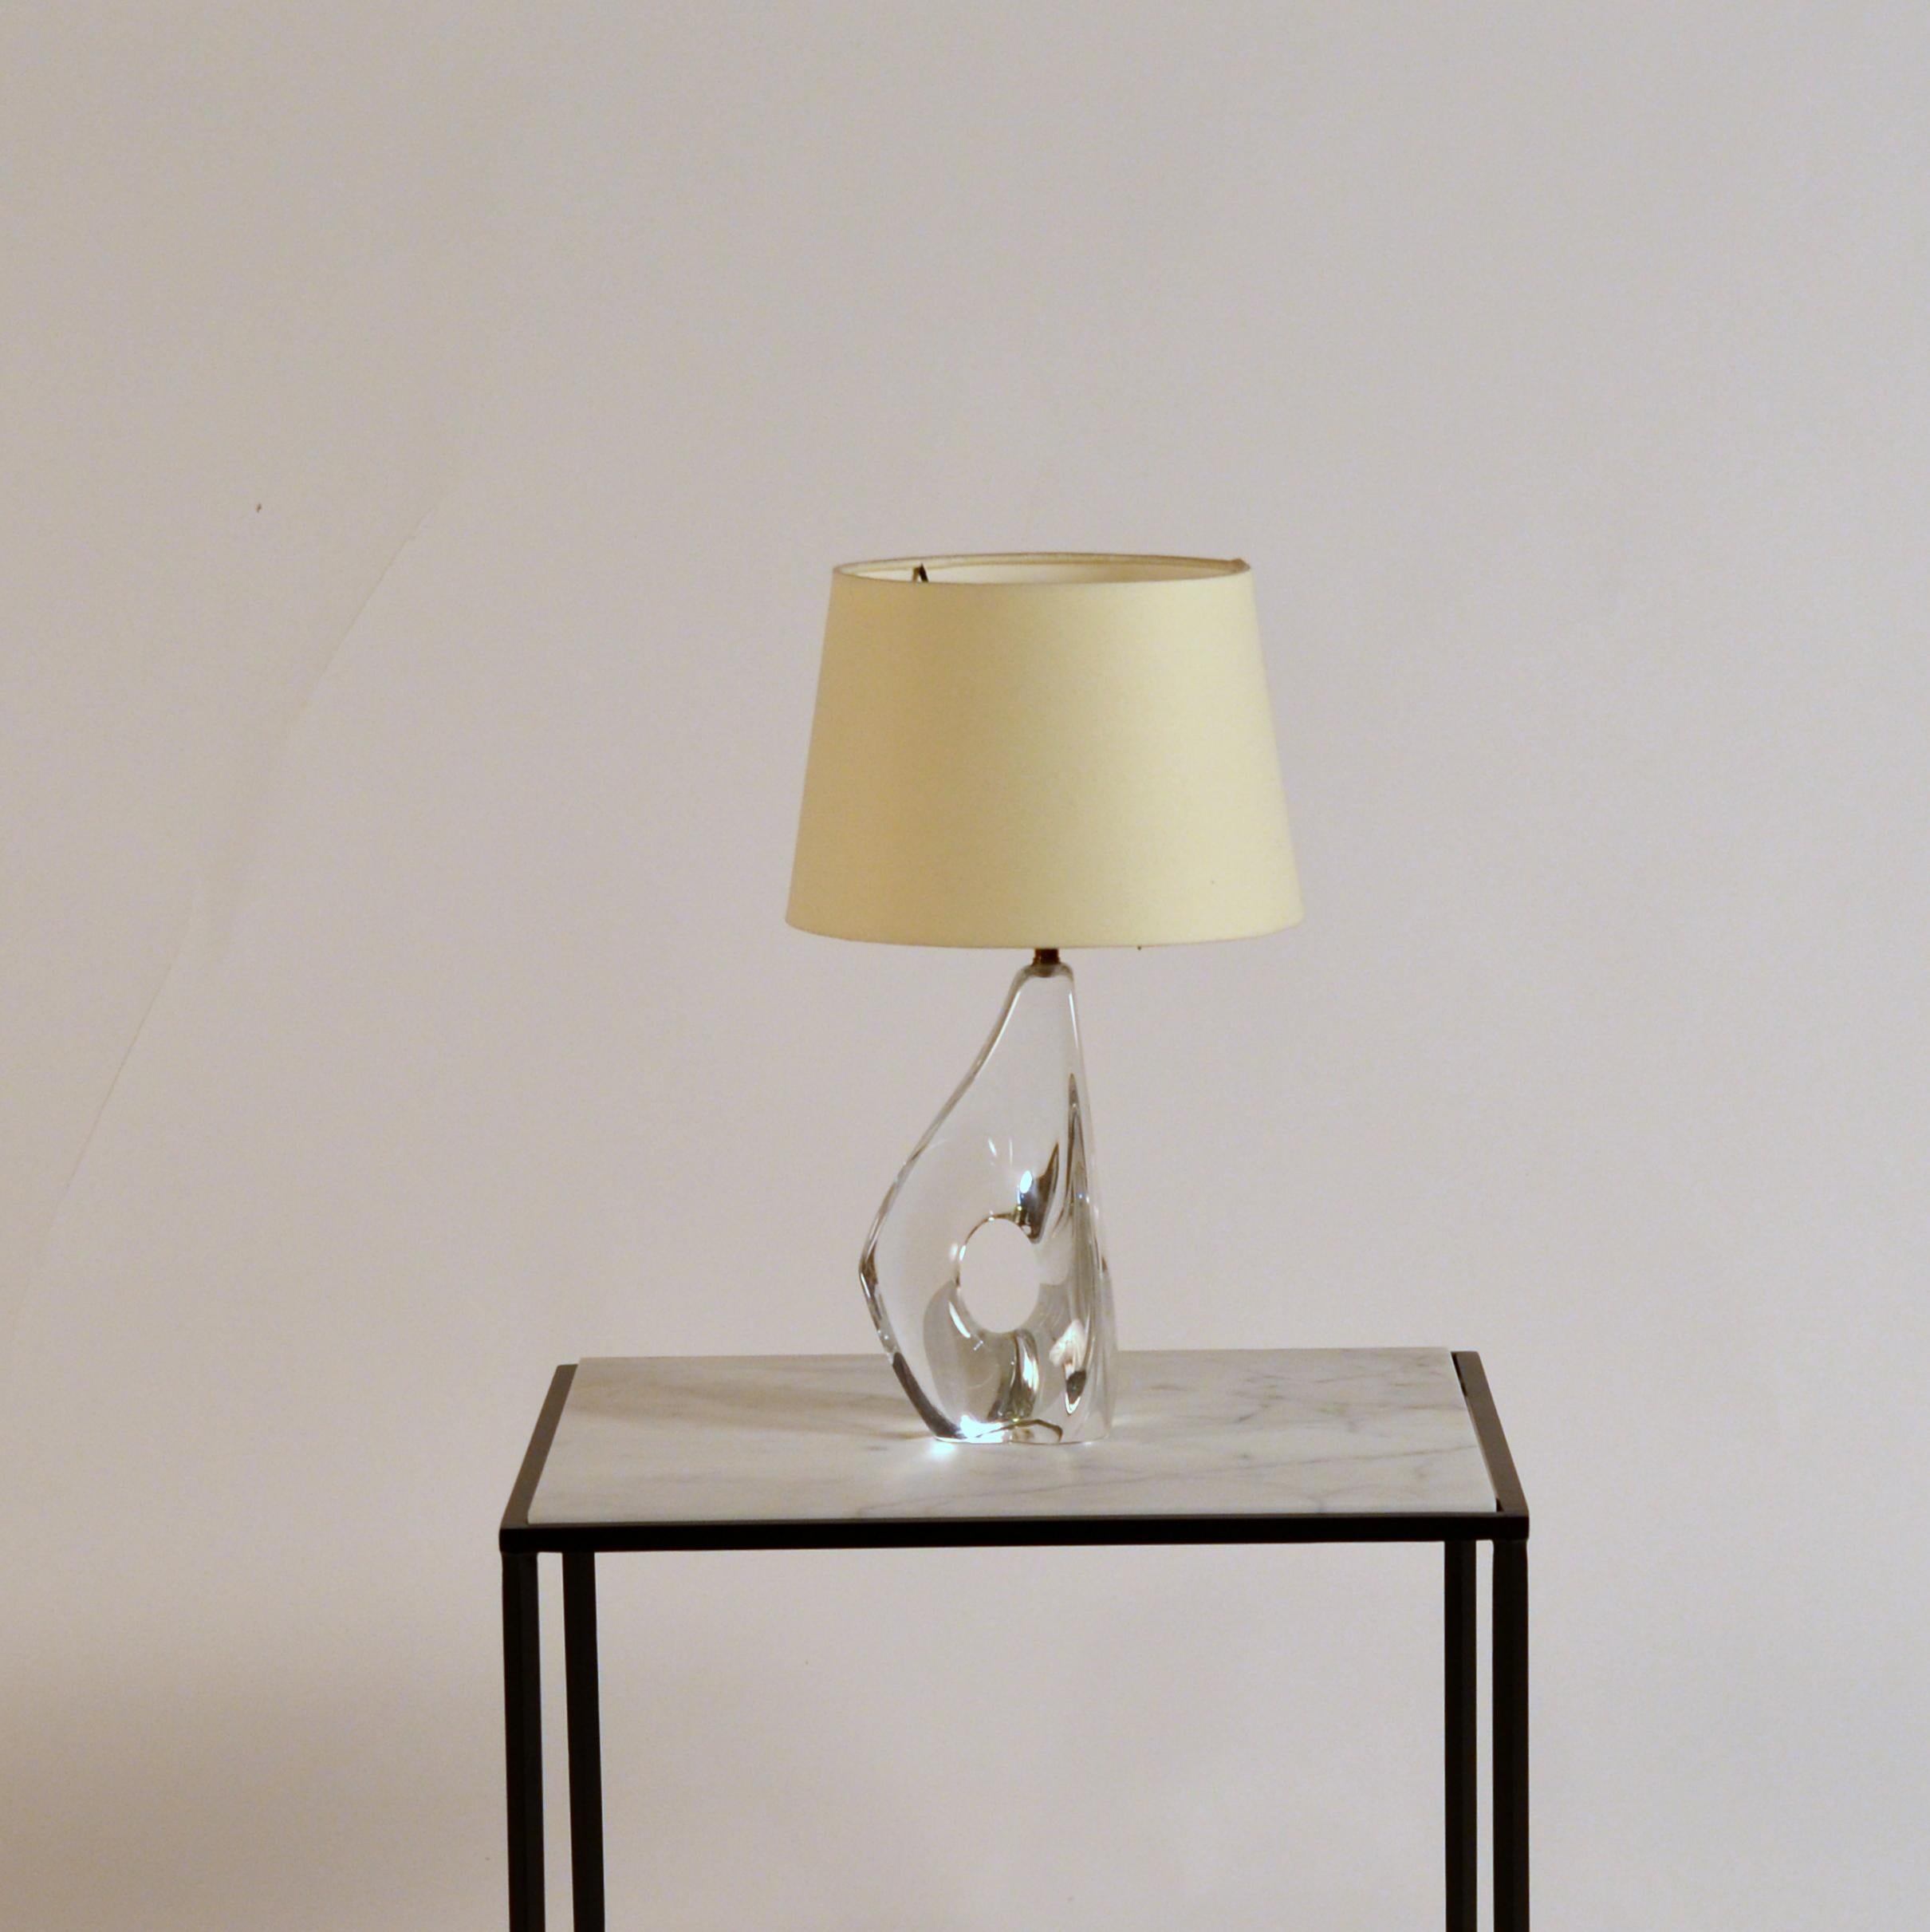 Elegant small freeform crystal and parchment table lamp by Daum.

Chic design with new European style shade (no harp).

Etched 